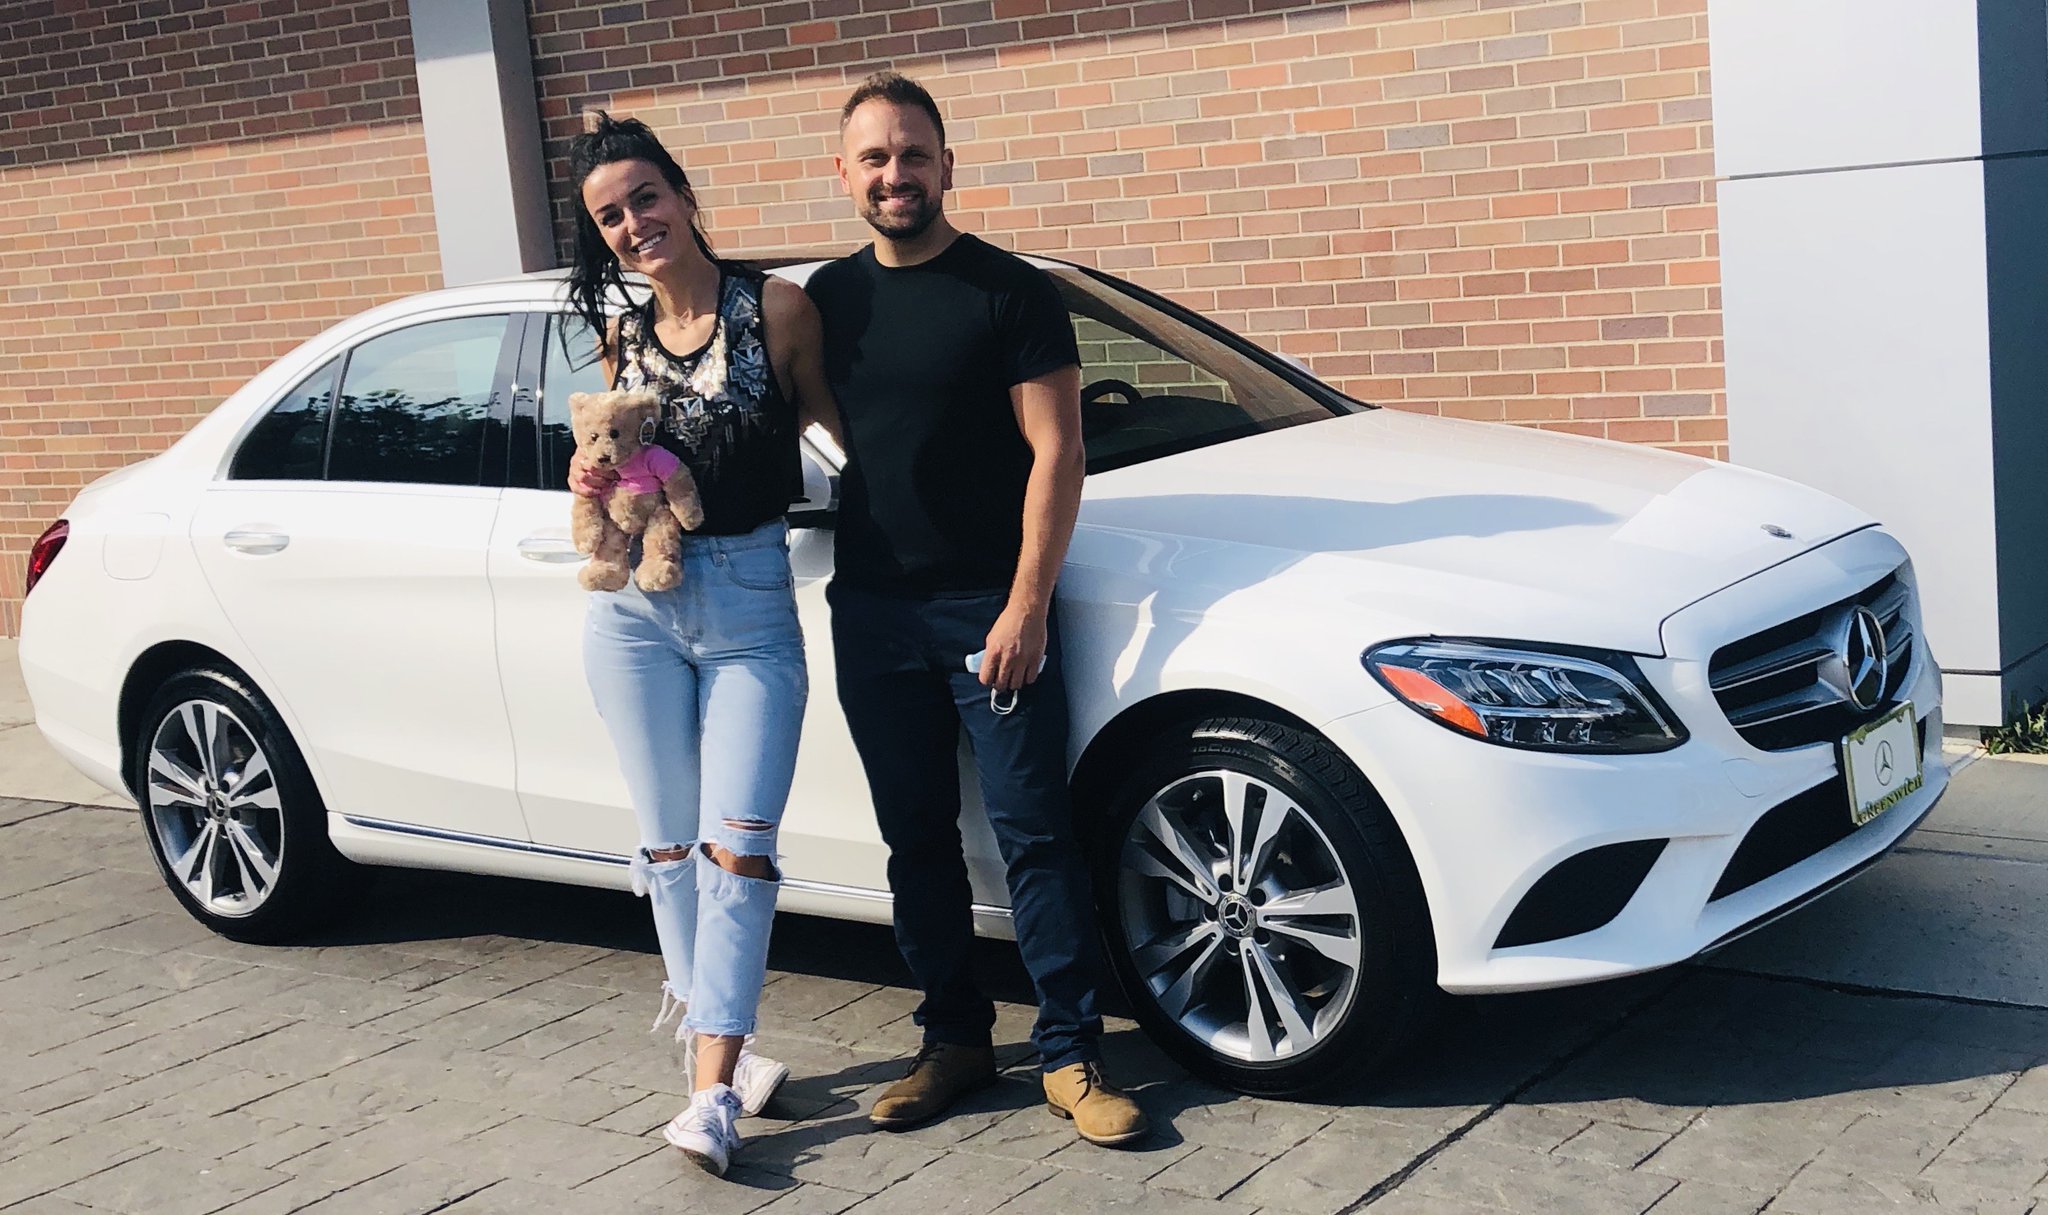 Mercedes Benz Of Greenwich On Twitter Paul Rudovic Made My First Mercedes Benz Experience Pleasant And Seamless Making Sure I Found The Right Car For Me Congratulations To Marsela On Her First Mercedes Benz A